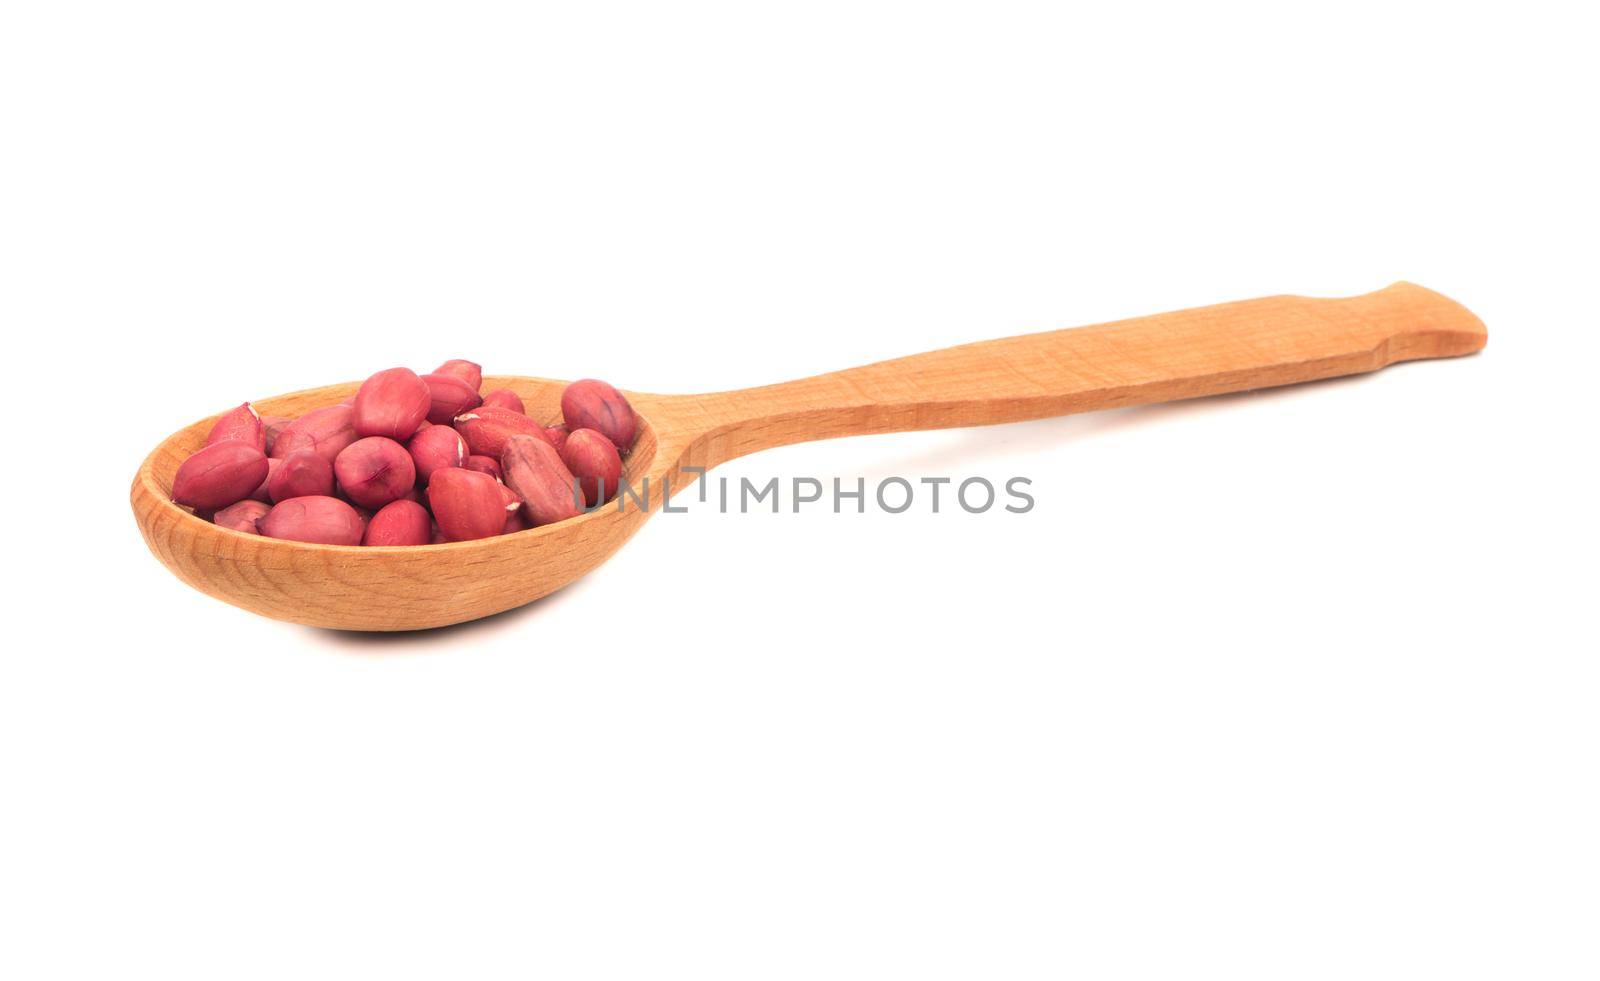 Peanuts in spoon by andregric